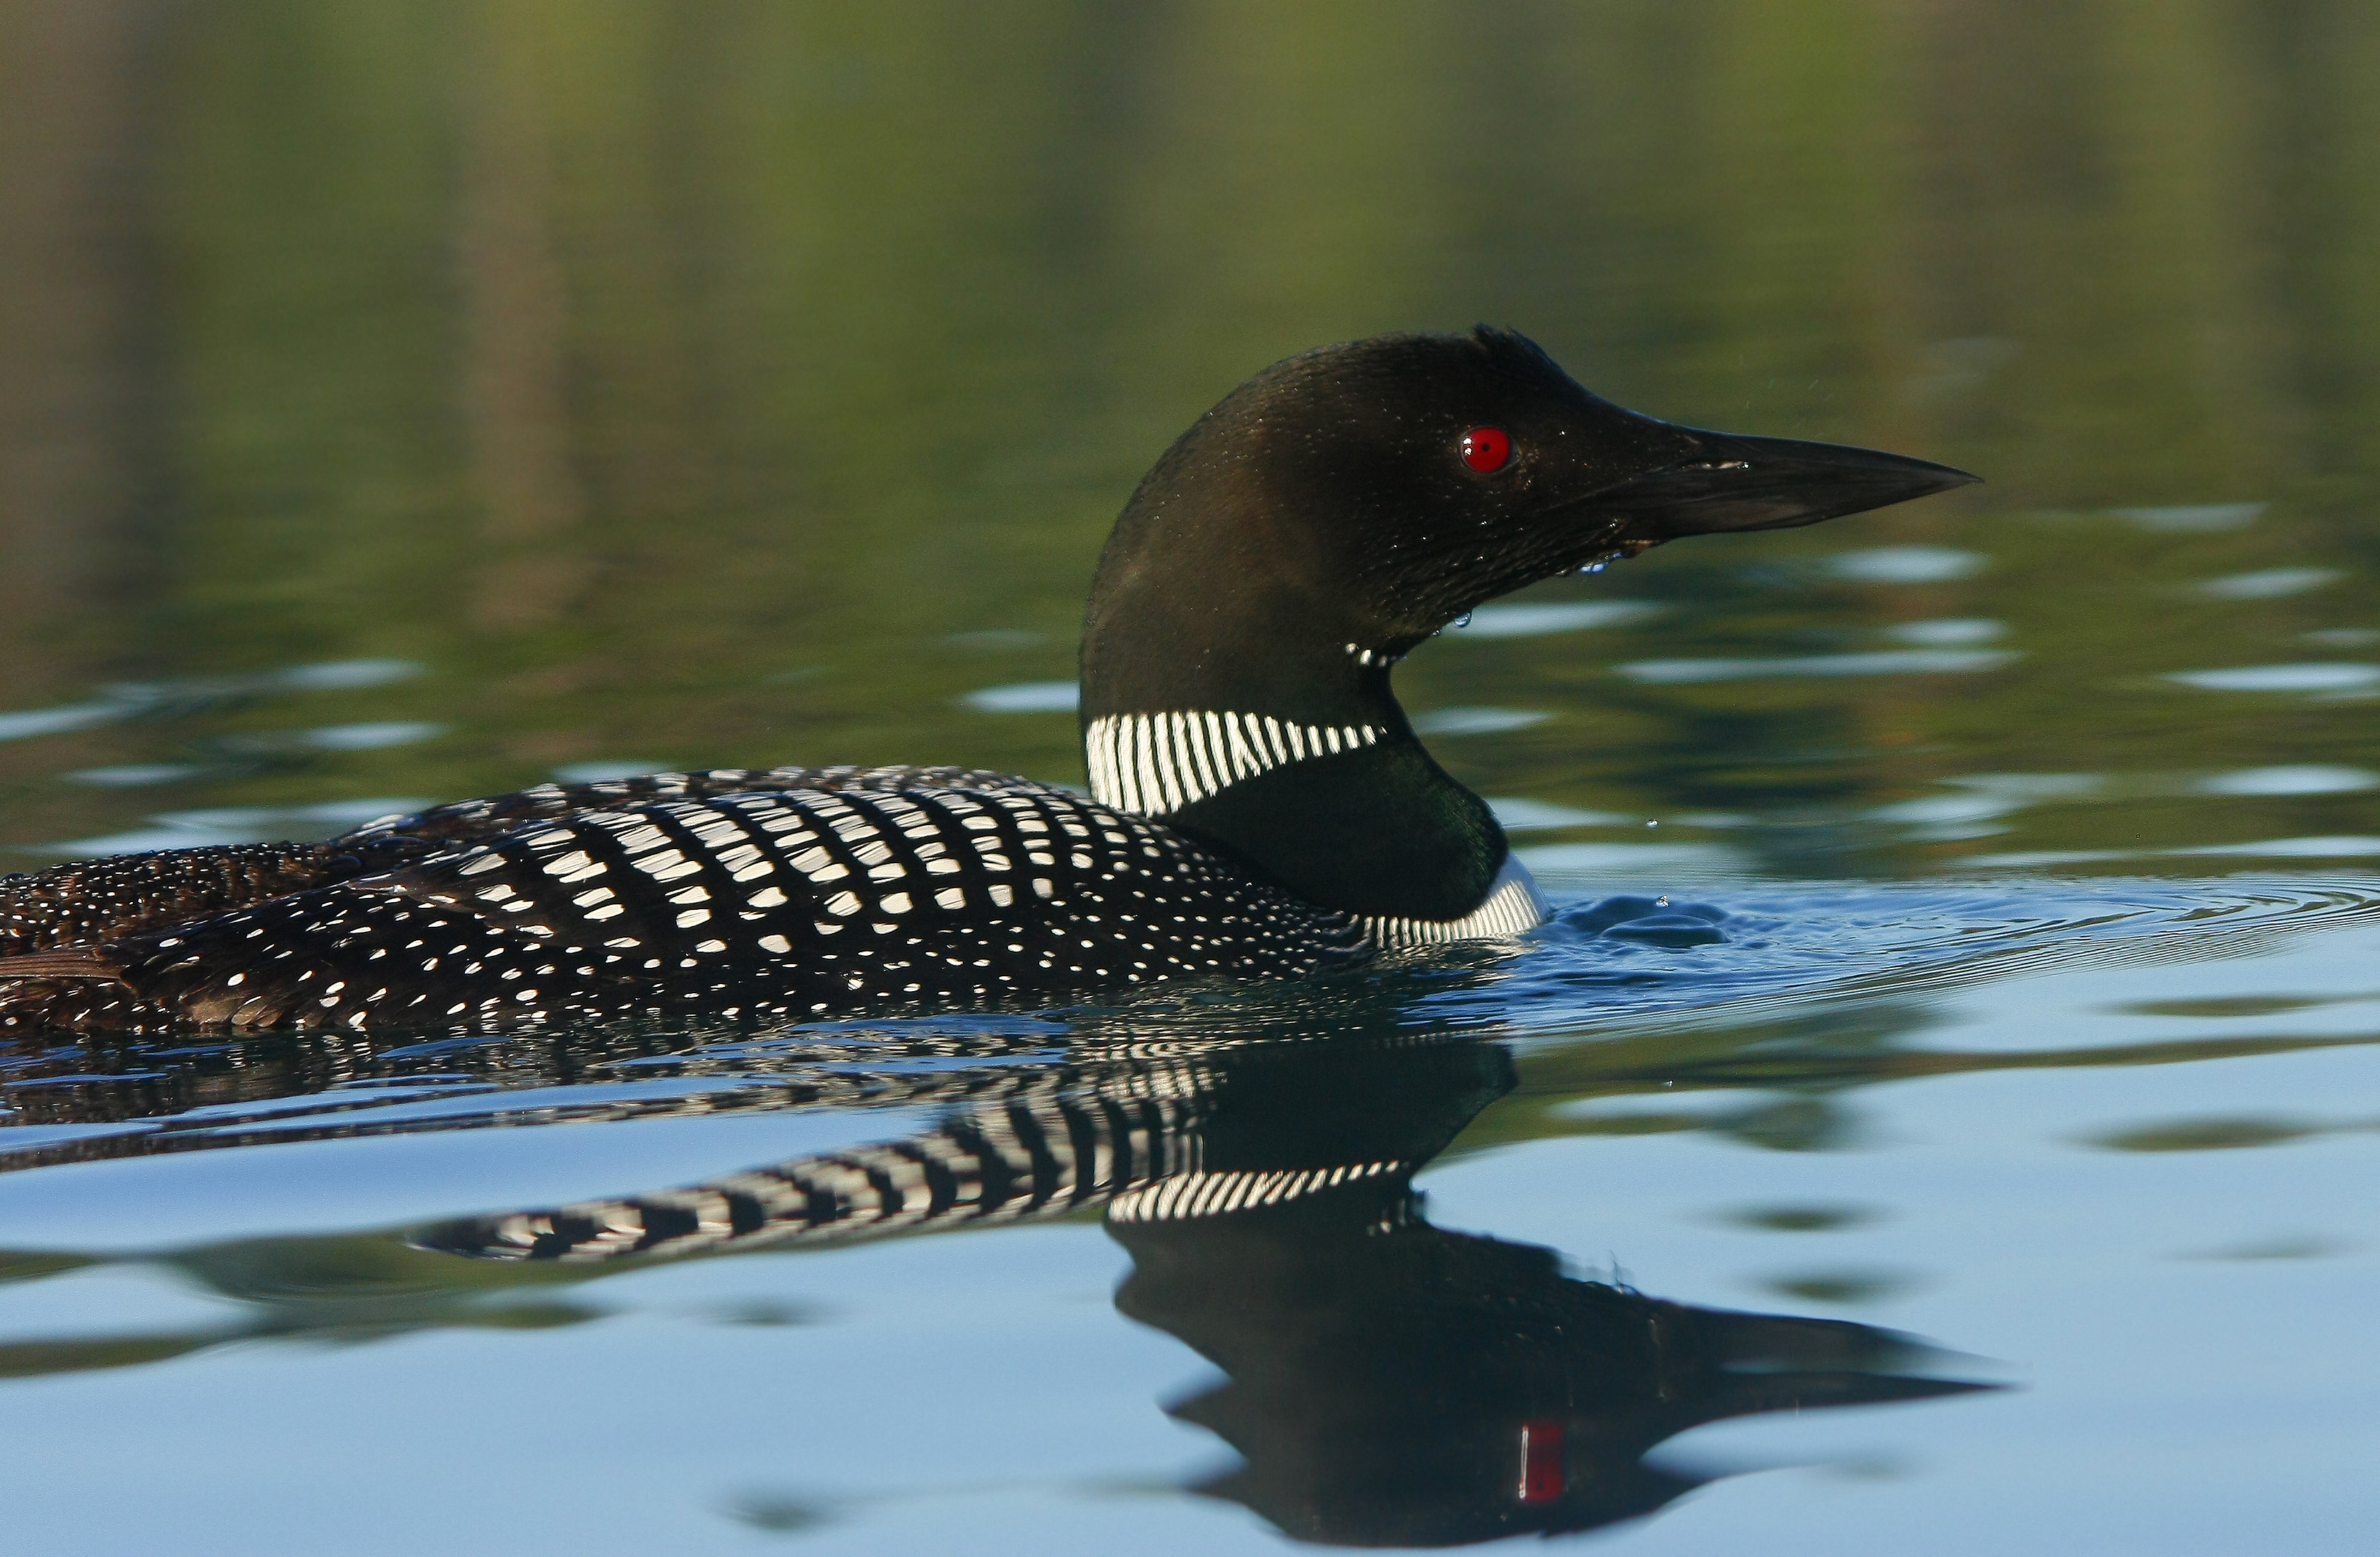 Adult Common Loon (Gavia immer) on Kettle's Lake © Copyright 2016 Awenda Provincial Park, All Rights Reserved